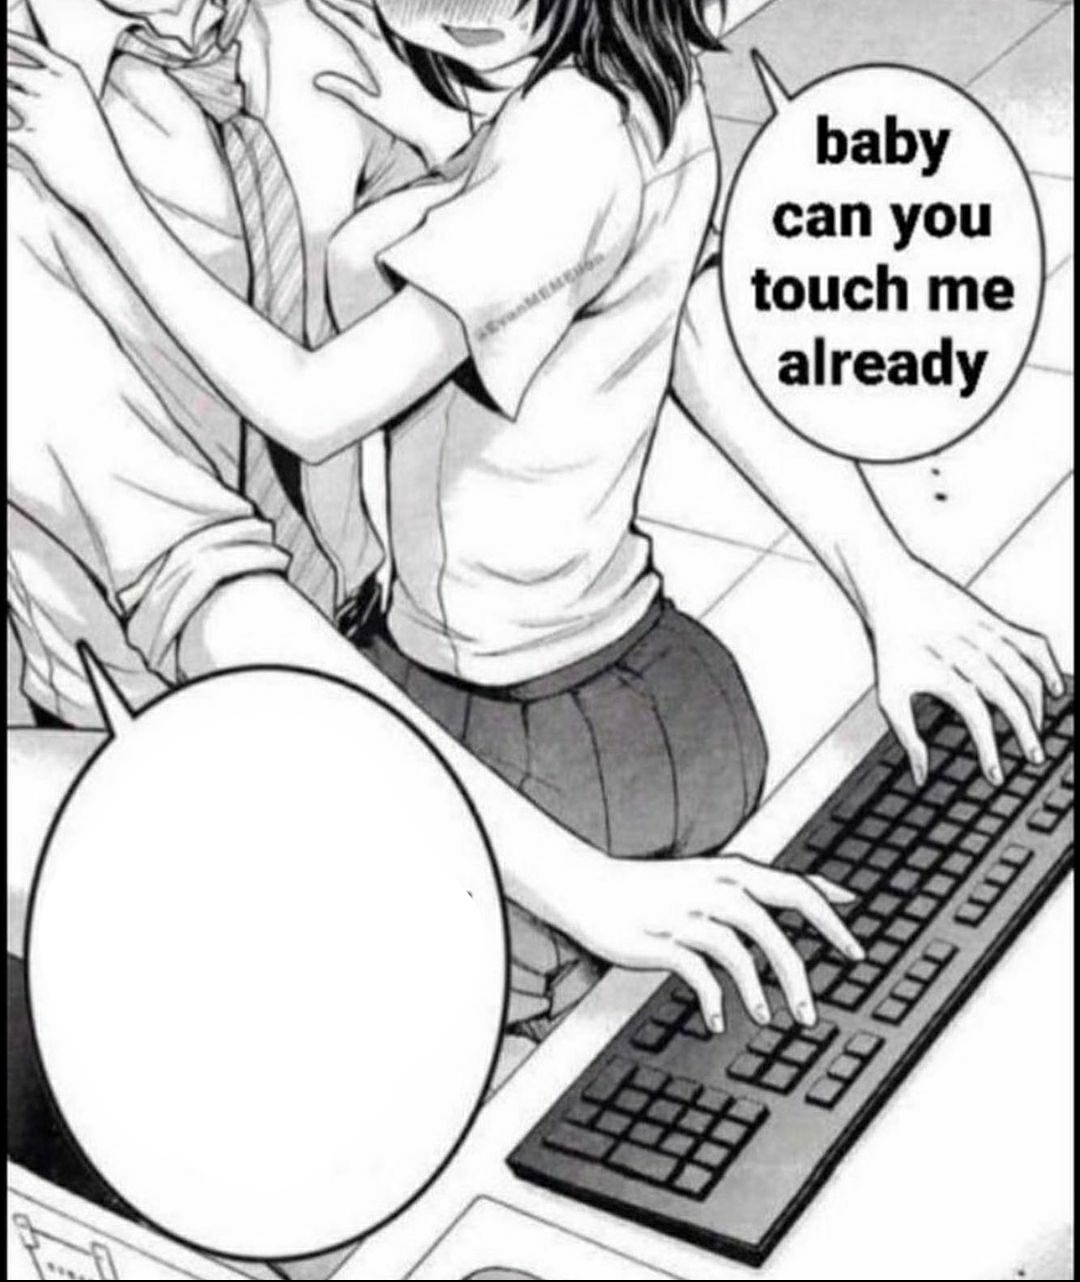 Babe can you touch me already Blank Meme Template